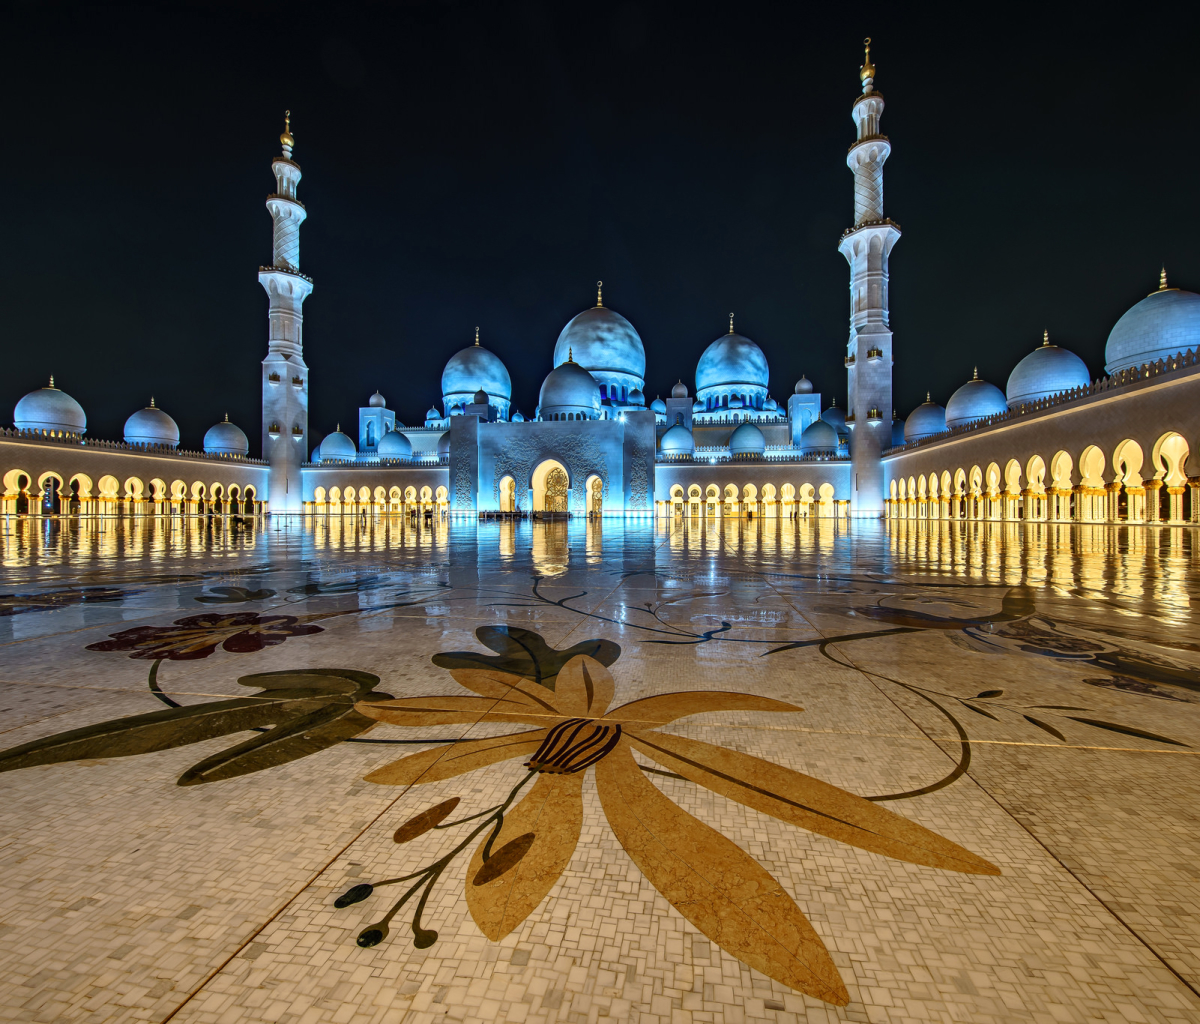 sheikh zayed grand mosque, abu dhabi, religious, architecture, dome, united arab emirates, light, night, mosque, mosques